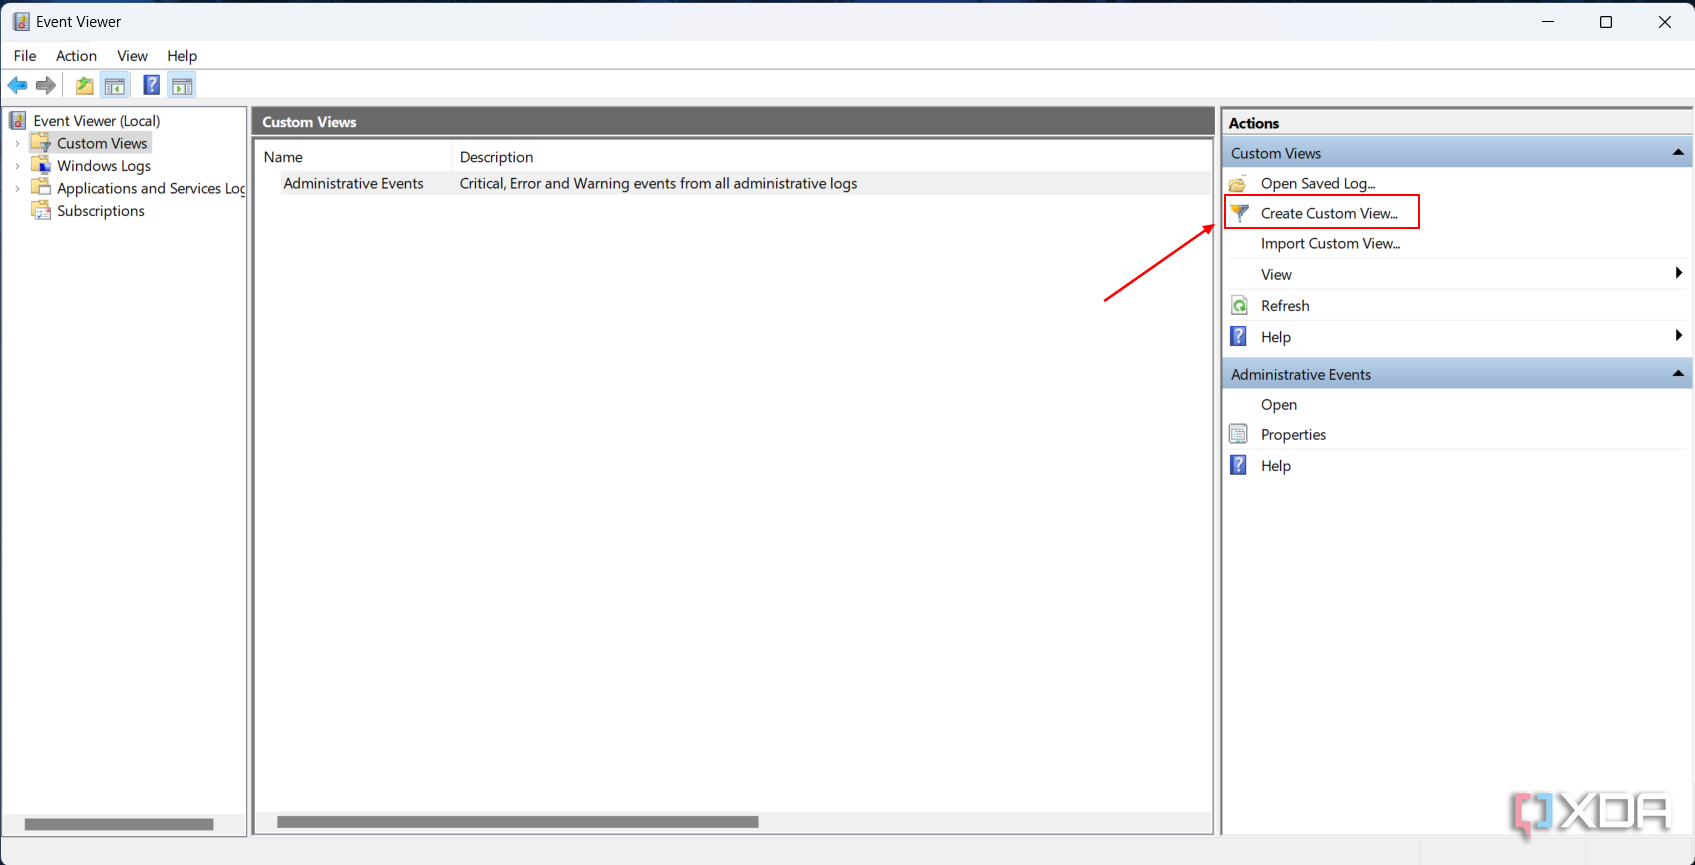 Screenshot of the Custom Views panel in Event Viewer